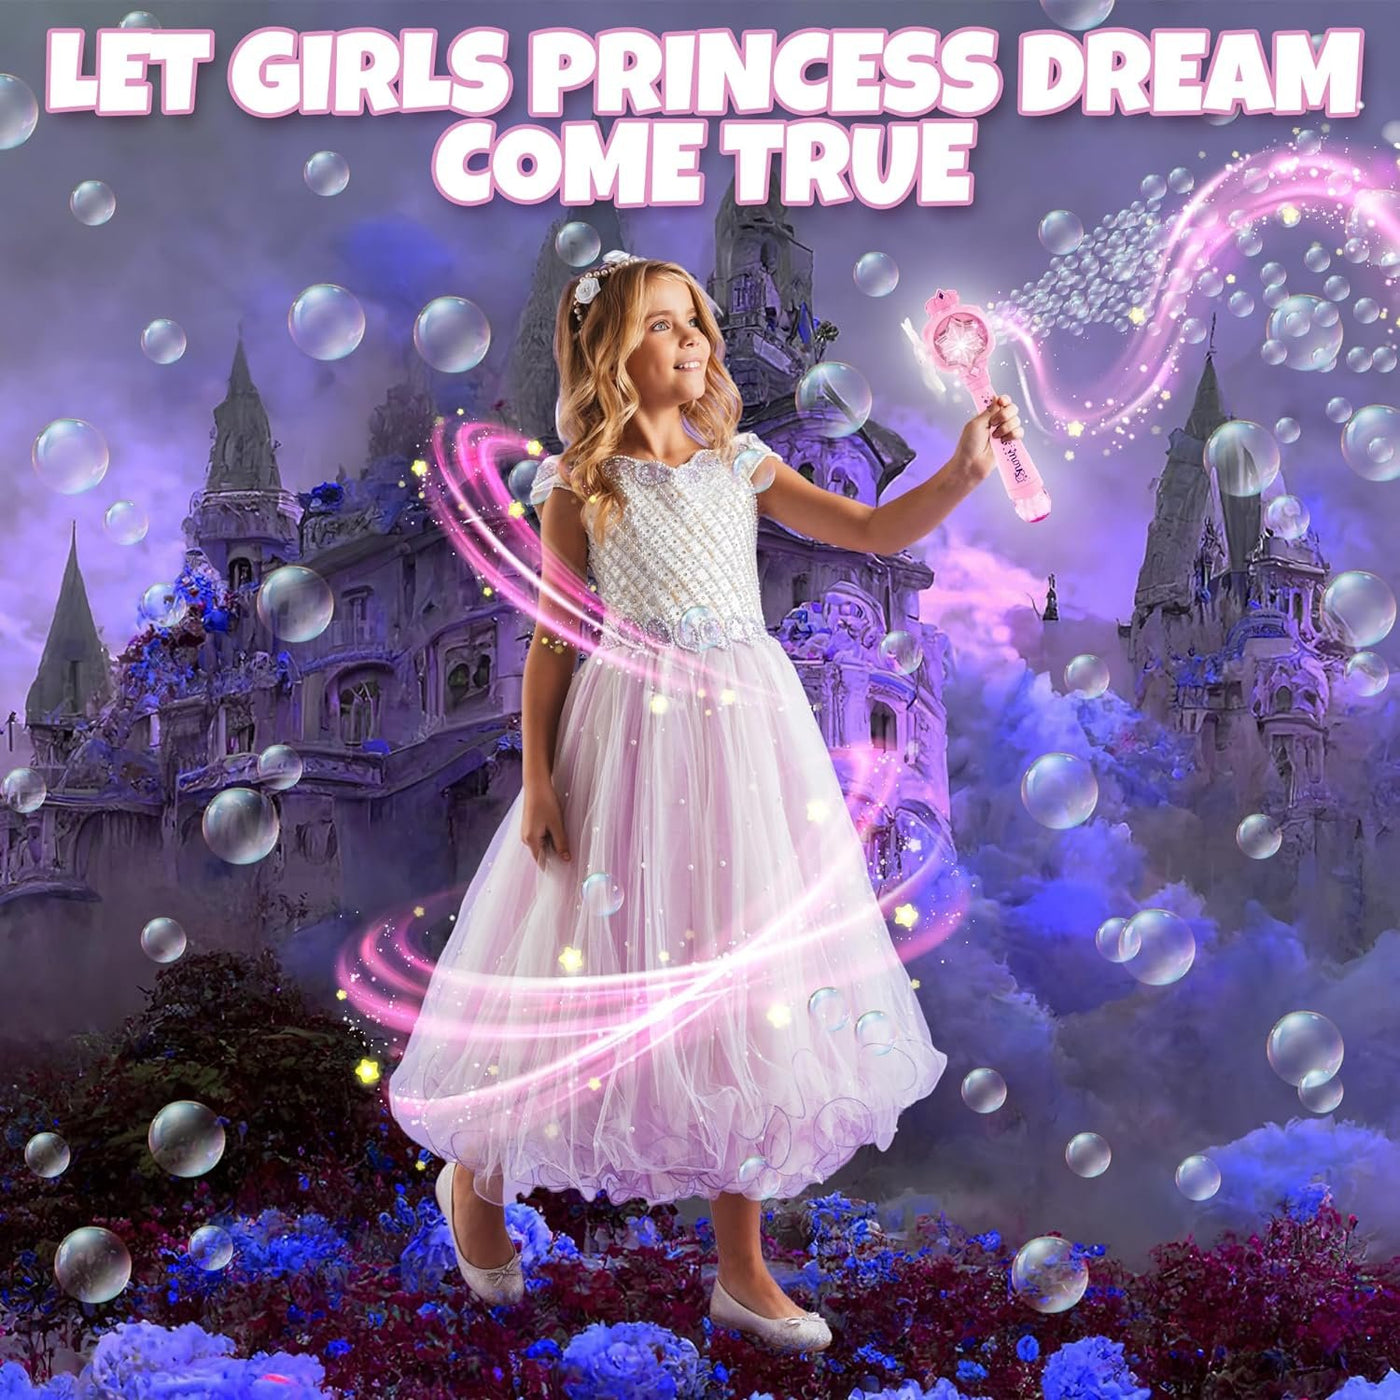 Light Up Princess Magic Bubble Blower Wand with Detachable Windmill, Princess Wand for Girls with 2 Bottles of Bubble Solution, LED Effects, & Music, Fun Pretend Play Prop, Birthday Gift